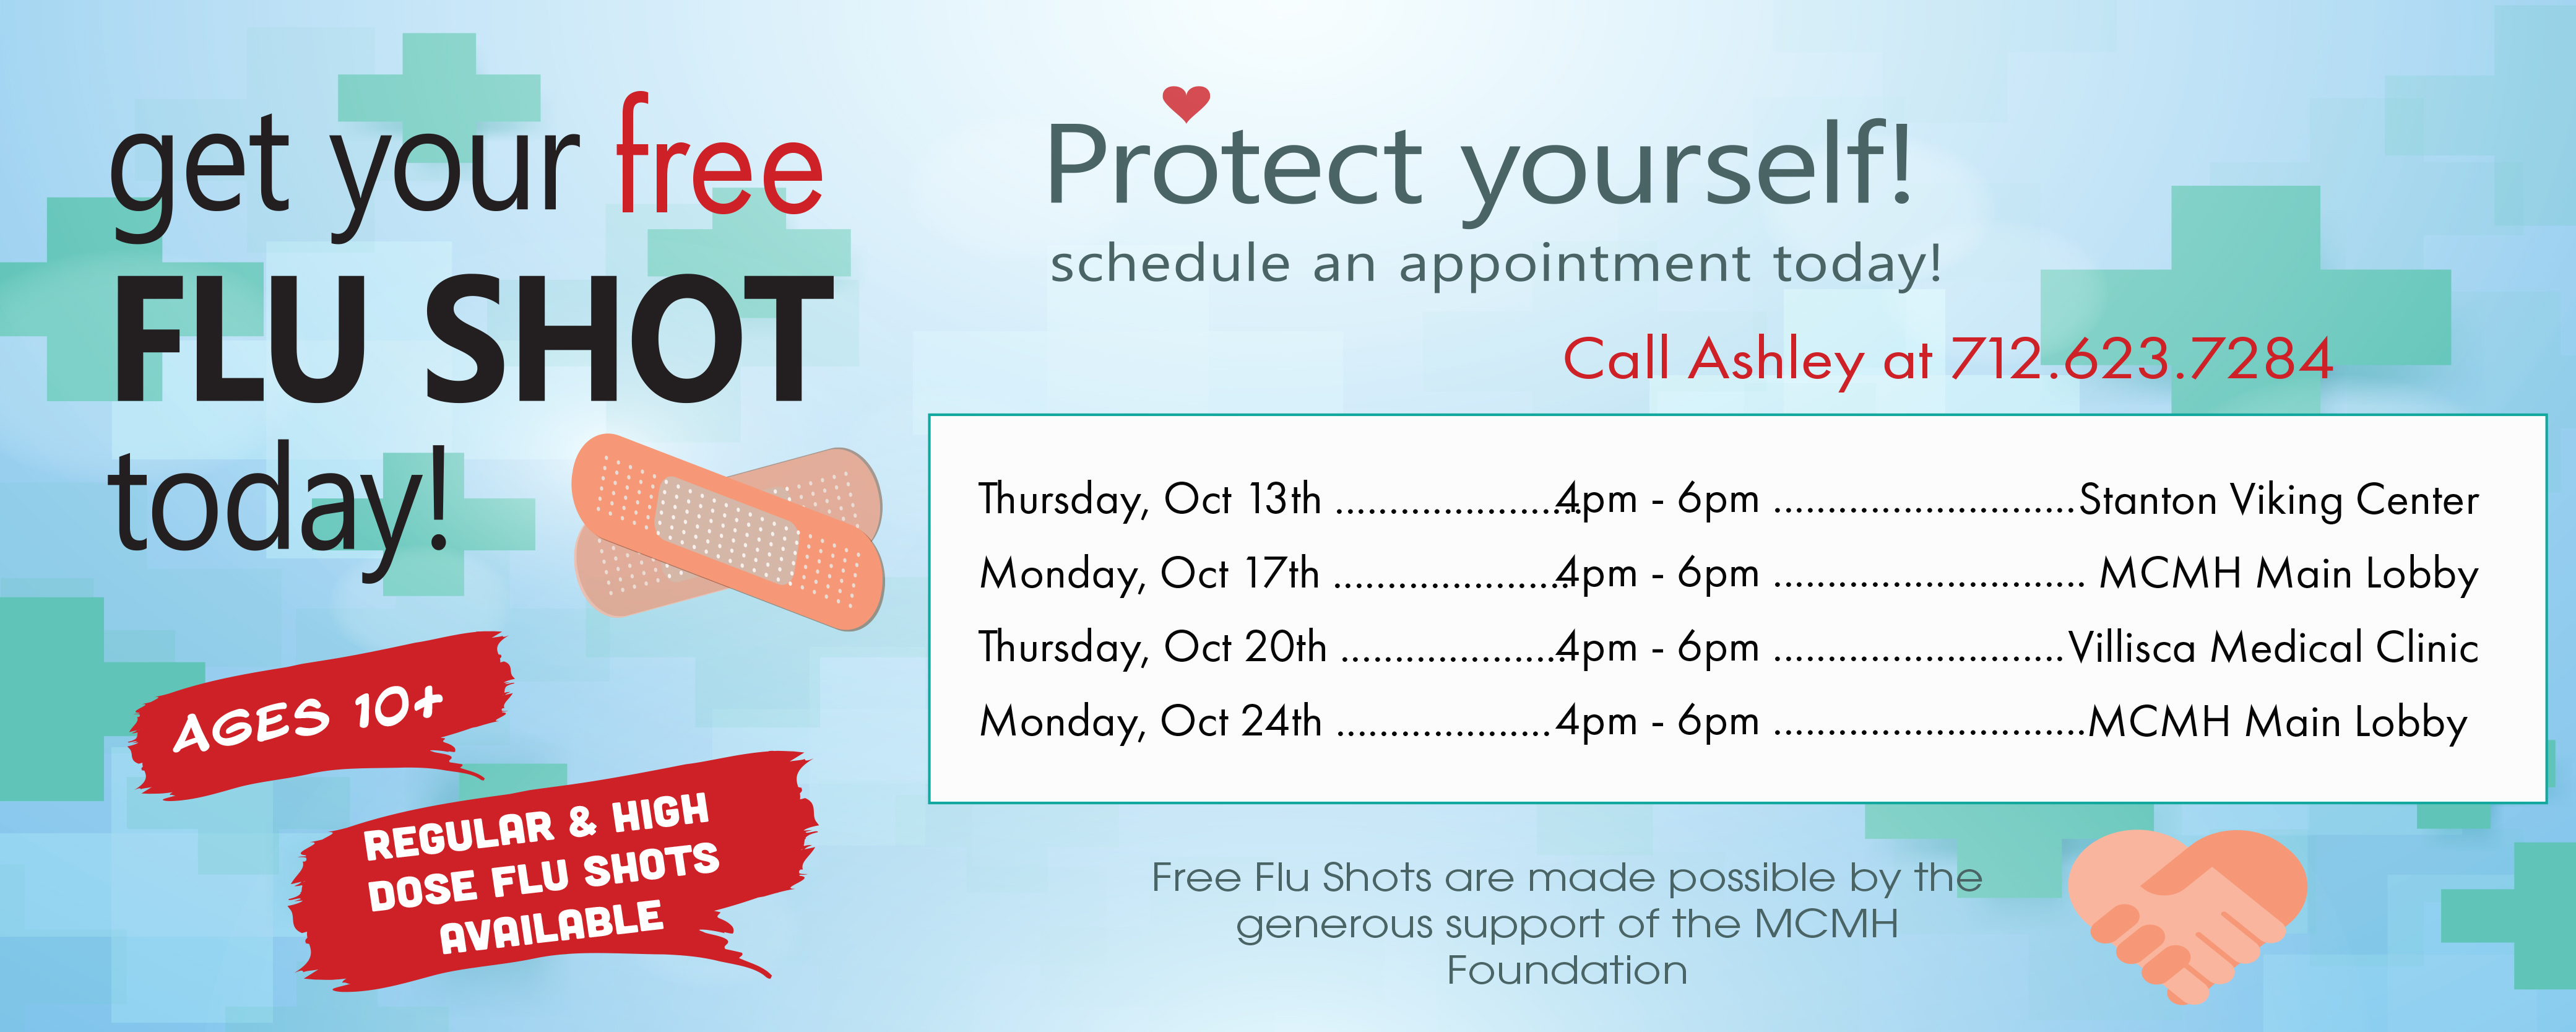 Banner picture of two bandaids, healthcare crosses, and two hands shaking in a heart shape form. Banner says:

Get your free FLU SHOT today!
Ages 10+
REGULAR & HIGH DOSE FLU SHOTS AVAILABLE

Protect yourself!
schedule an appointment today!
Call Ashley at 712.623.7284

Thursday       Oct 13th-4pm-6pm        * Stanton Viking Center
Monday         Oct 17th-4pm-6pm         *MCMH Main Lobby
Thursday       Oct 20th-4pm-6pm        *Villisca Medical Clinic
Monday         Oct 24th-4pm-6pm        *MCMH Main Lobby

Free Flu Shots are made possible by the generous support of the MCMH Foundation